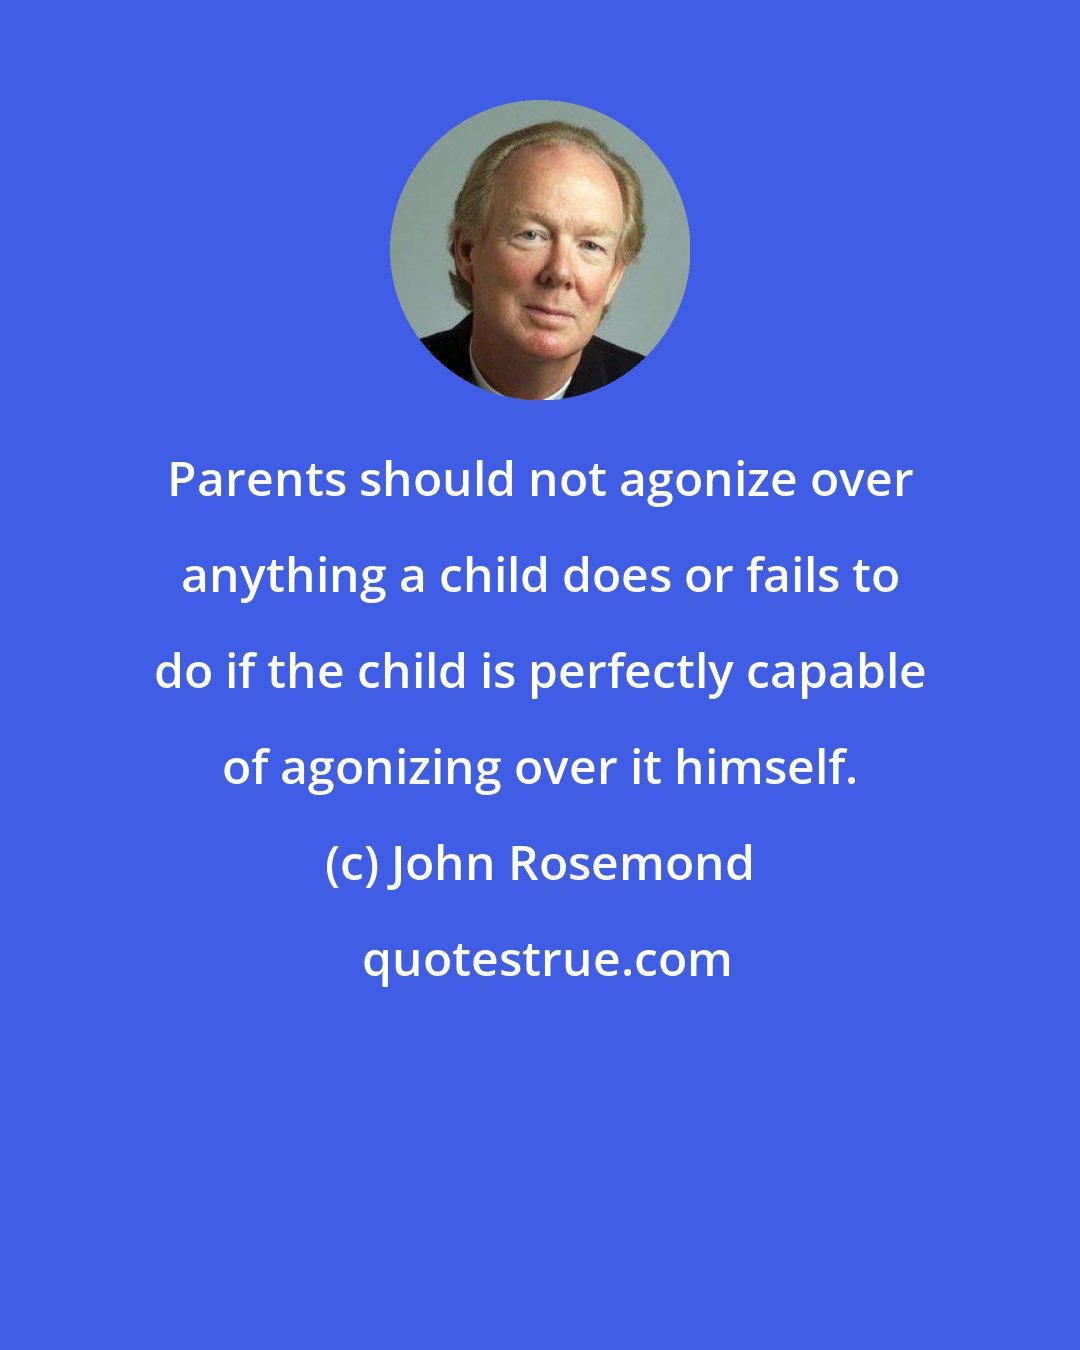 John Rosemond: Parents should not agonize over anything a child does or fails to do if the child is perfectly capable of agonizing over it himself.